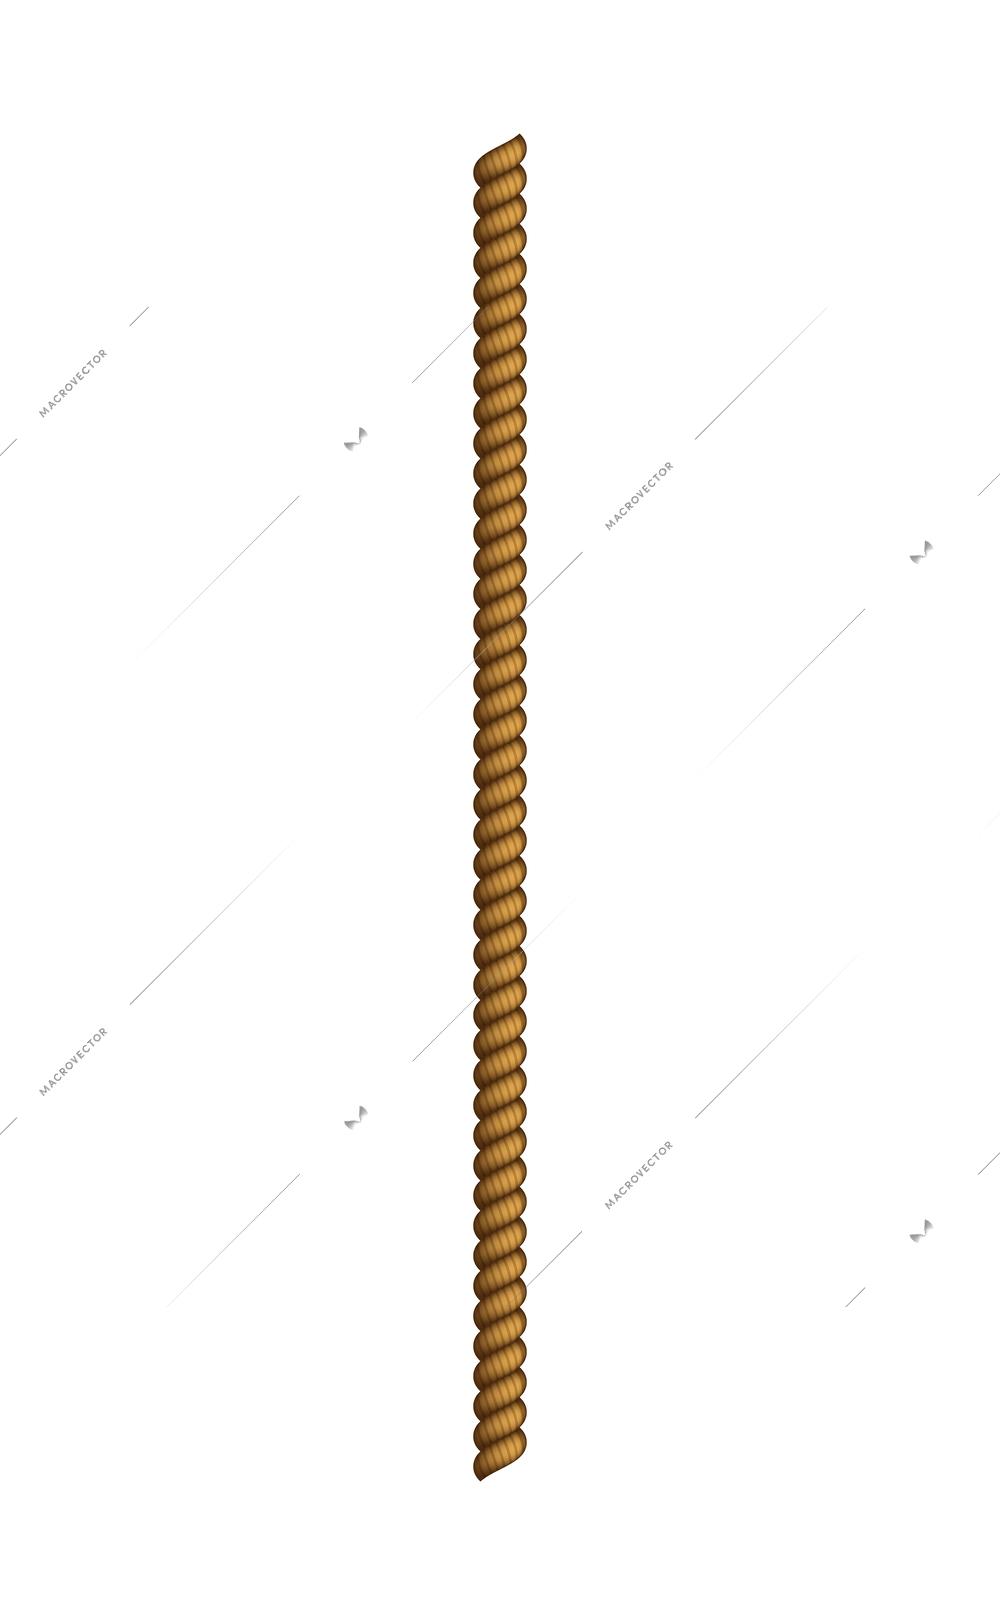 Straight rope piece realistic decorative element on white background vector illustration